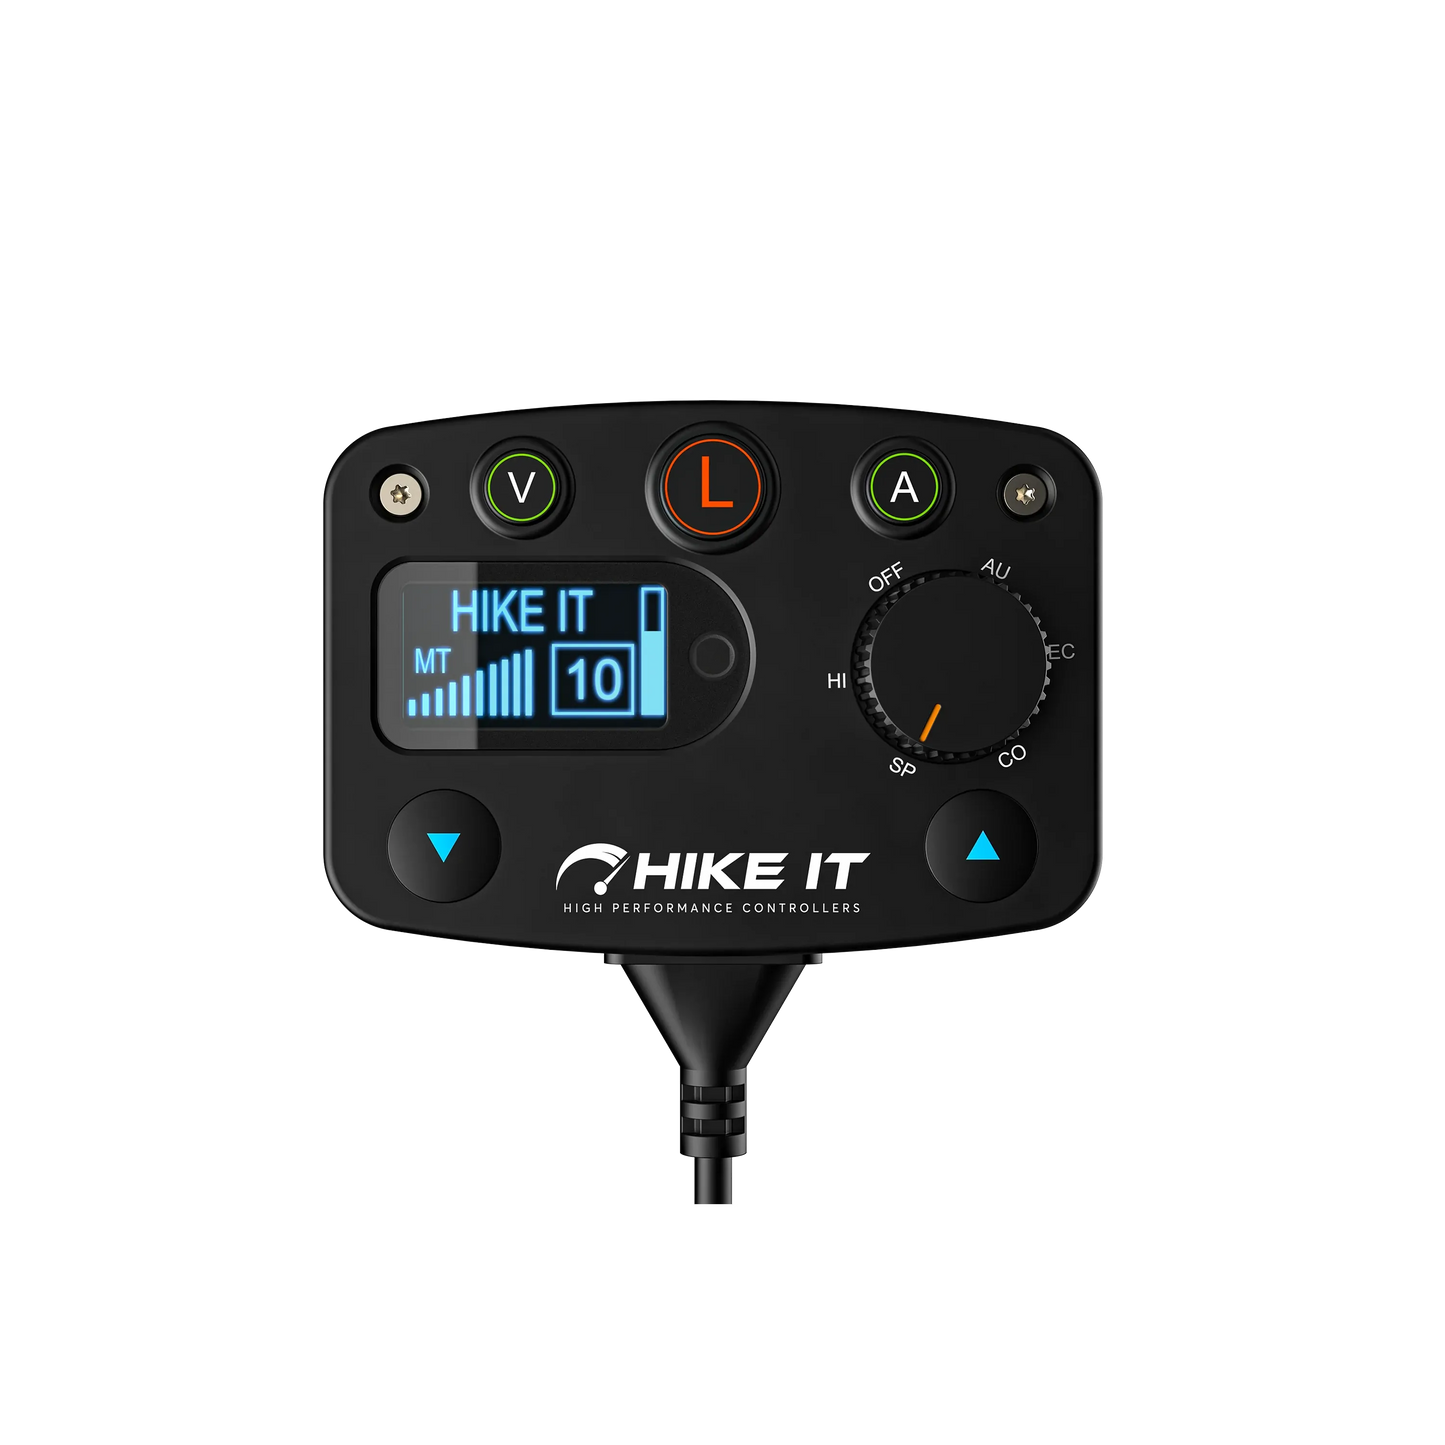 Hikeit XS Throttle Controller Suit Cadillac